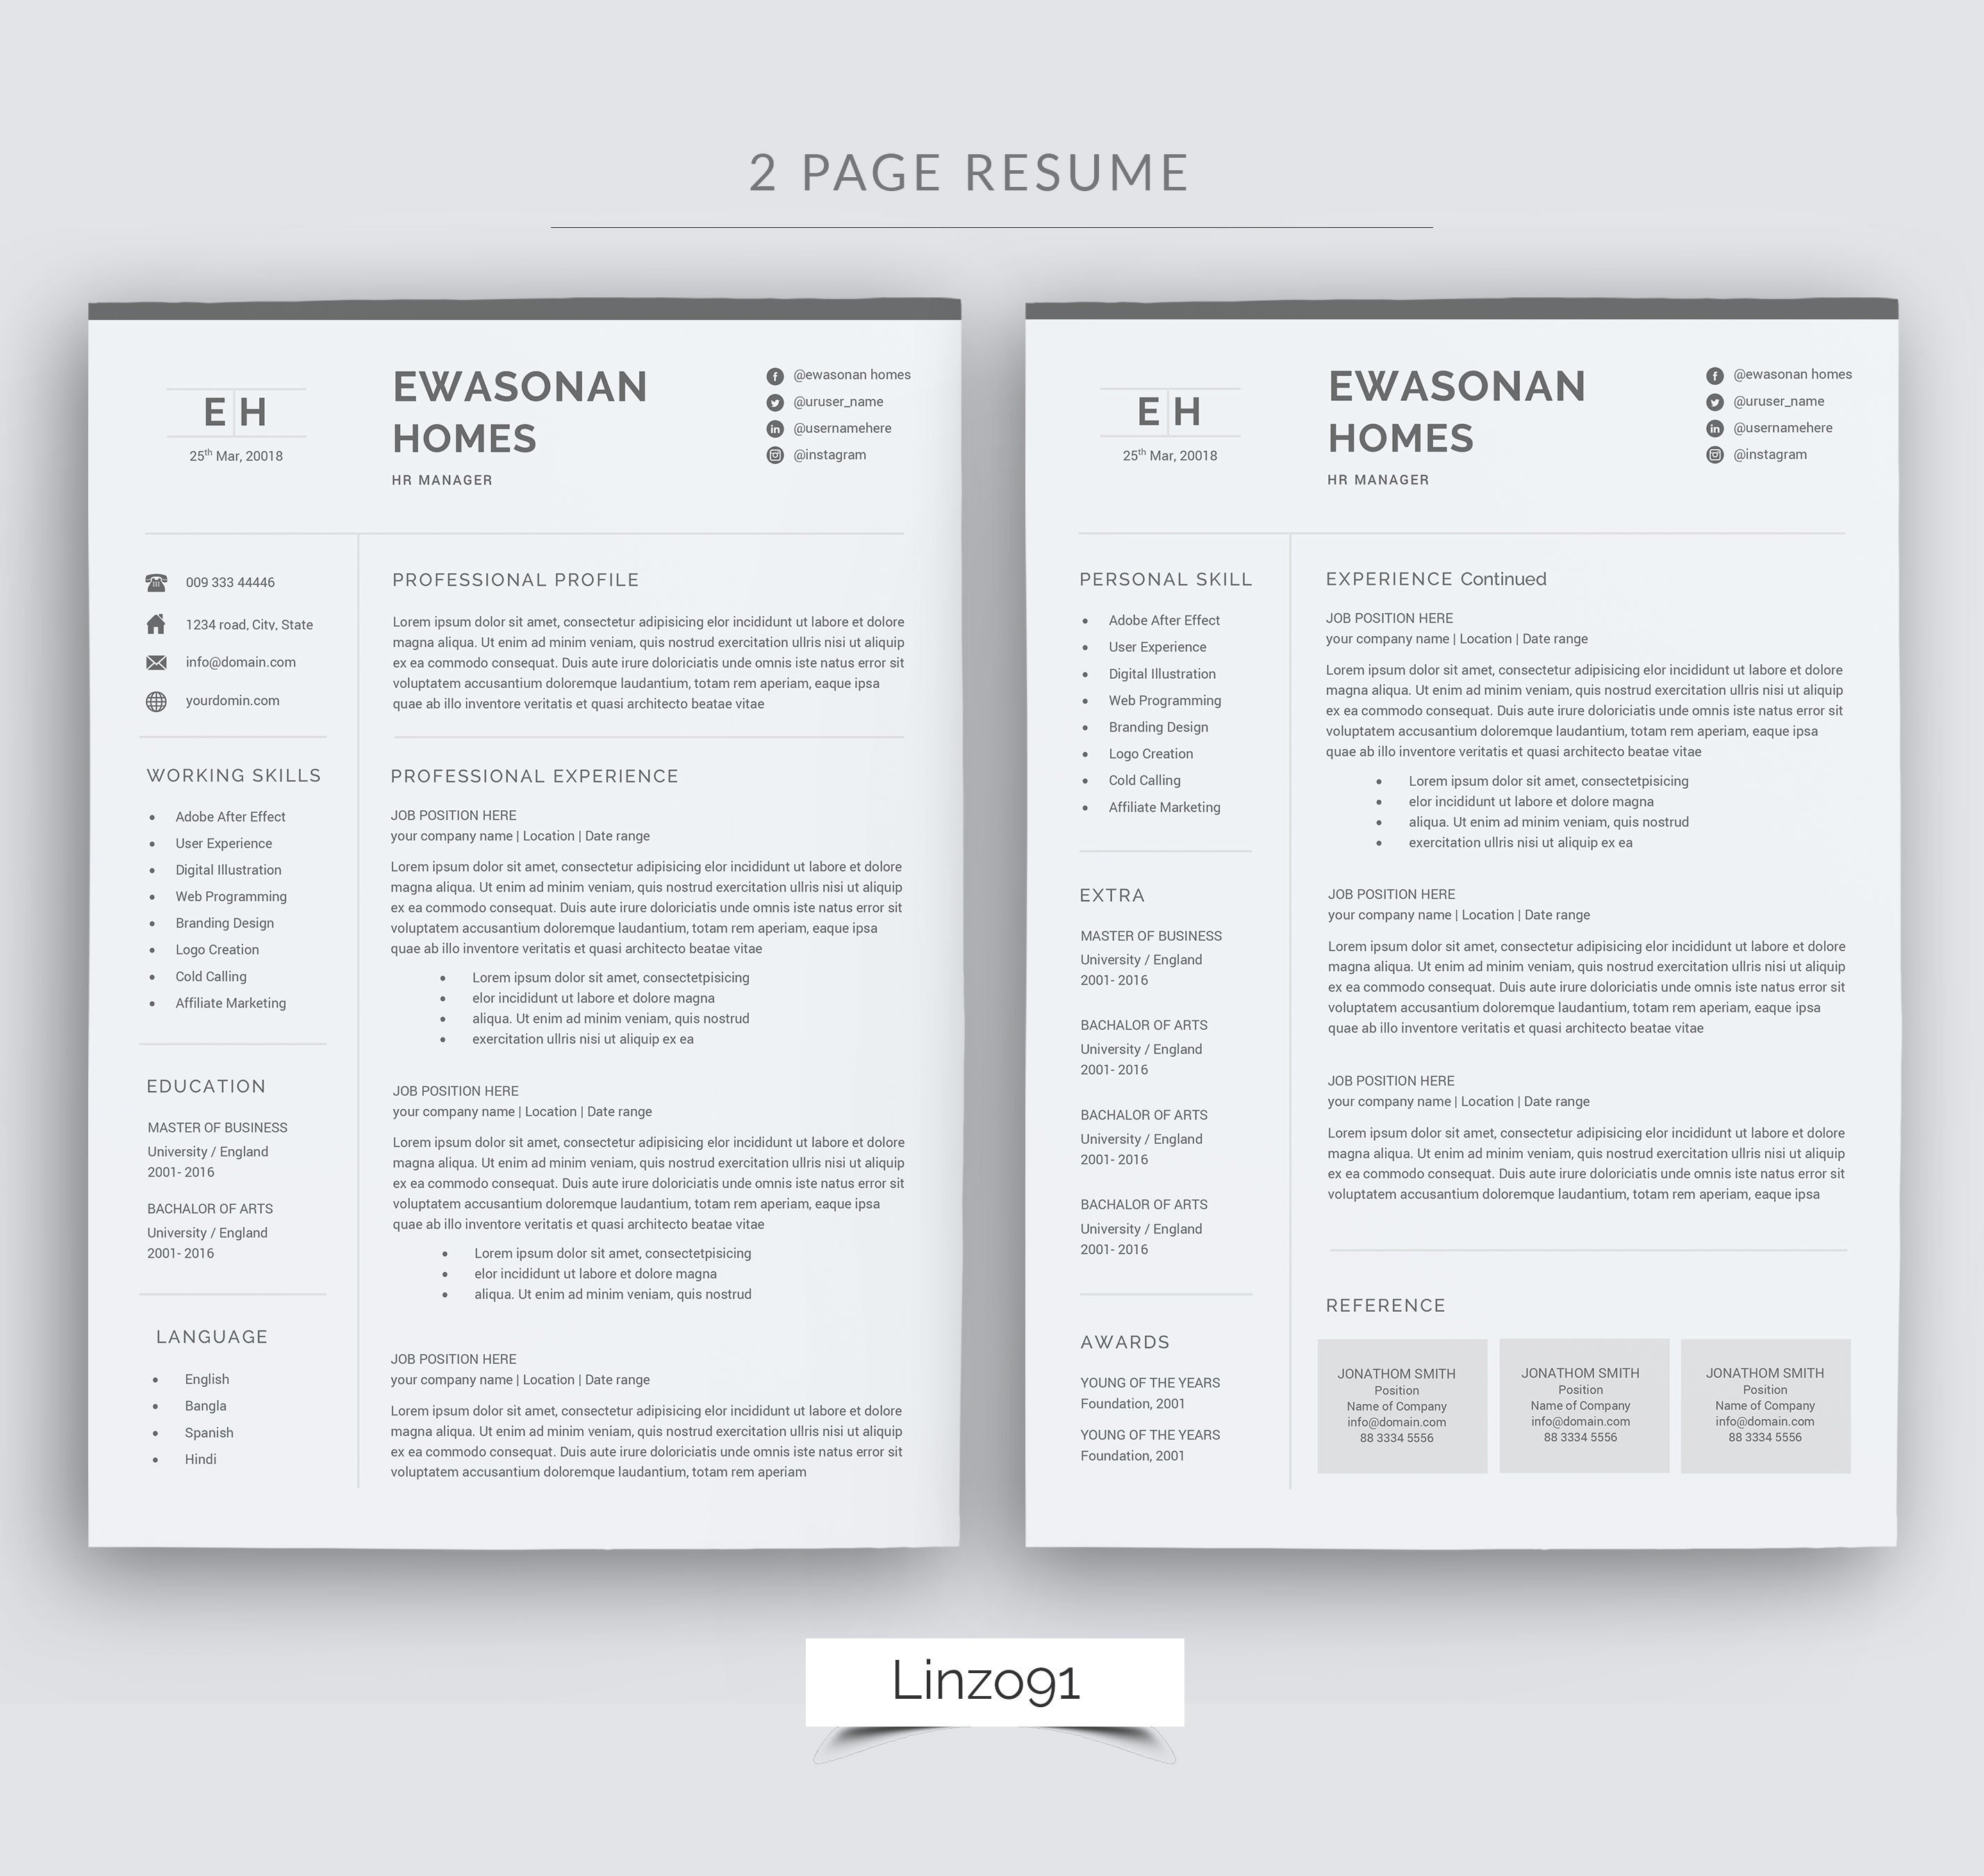 Minimal resume 3 pages CV template for word Two page